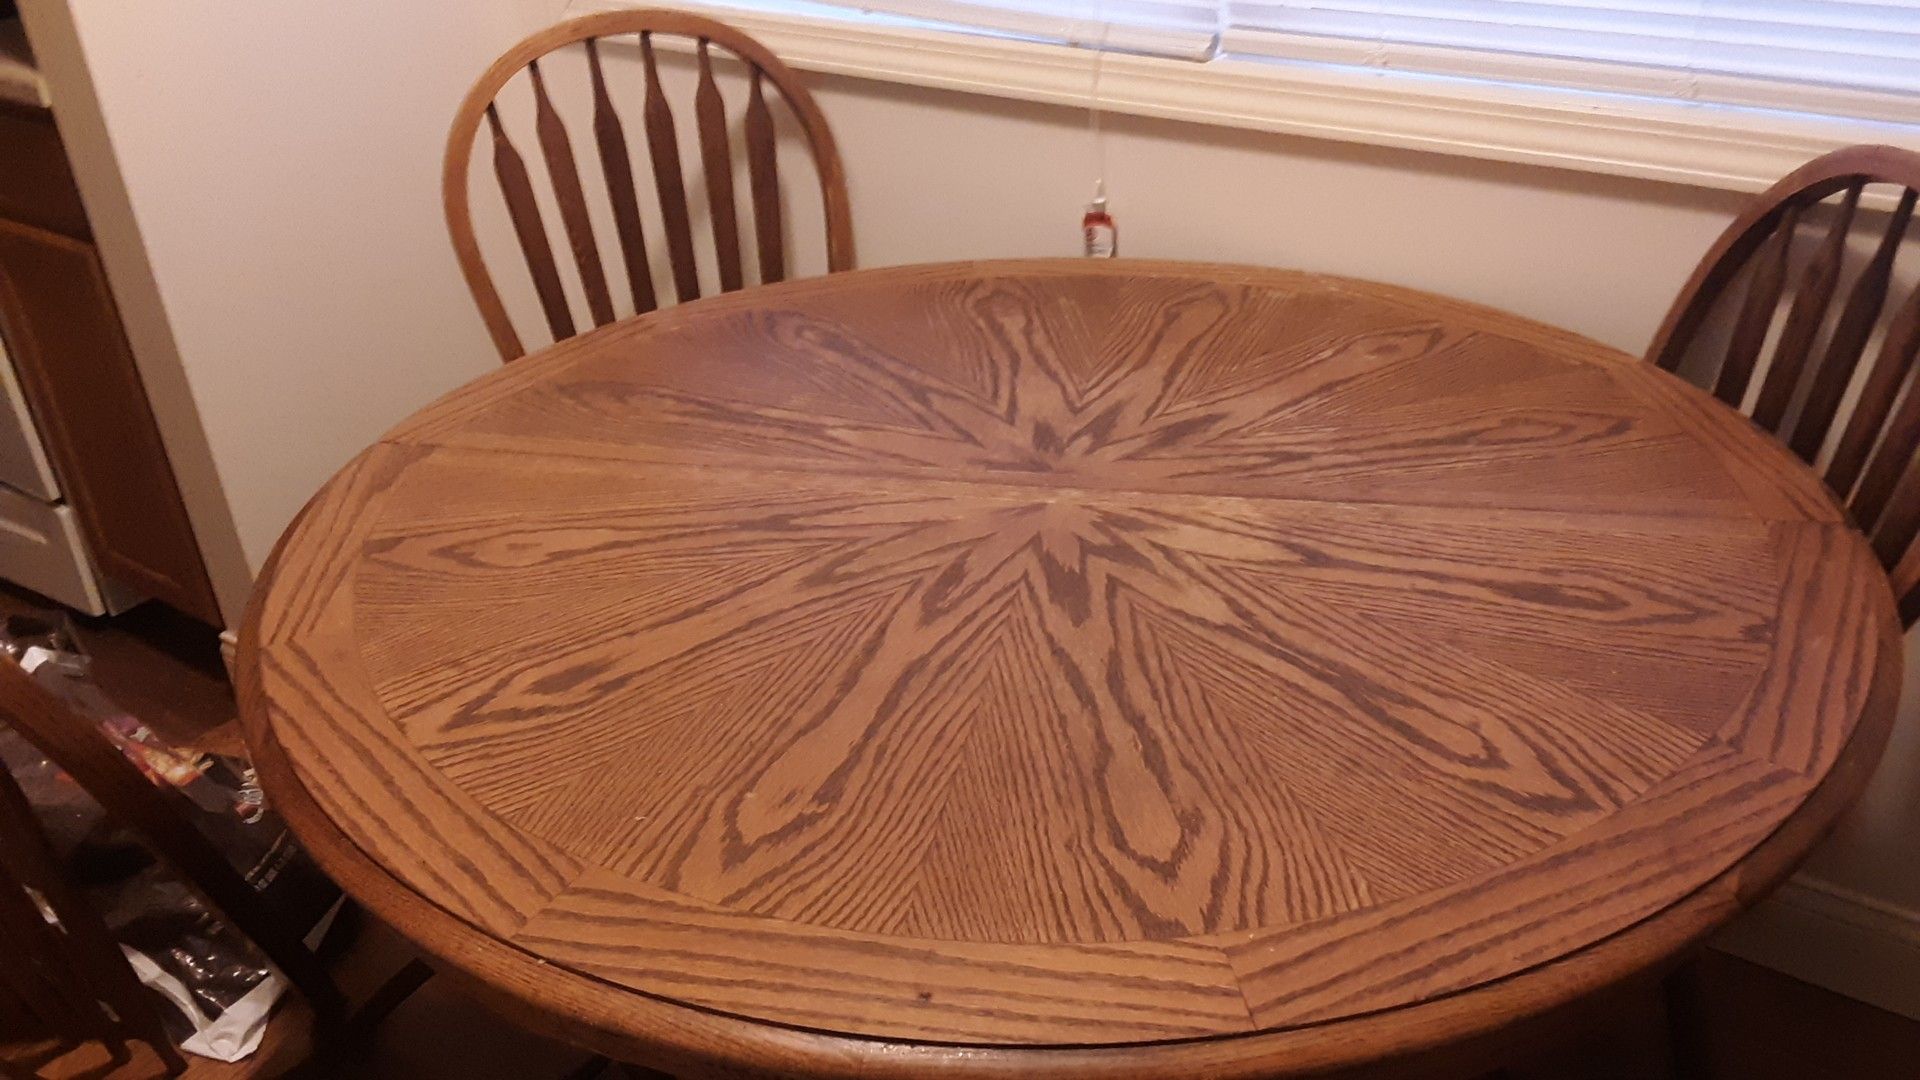 Kitchen table with 3 chairs